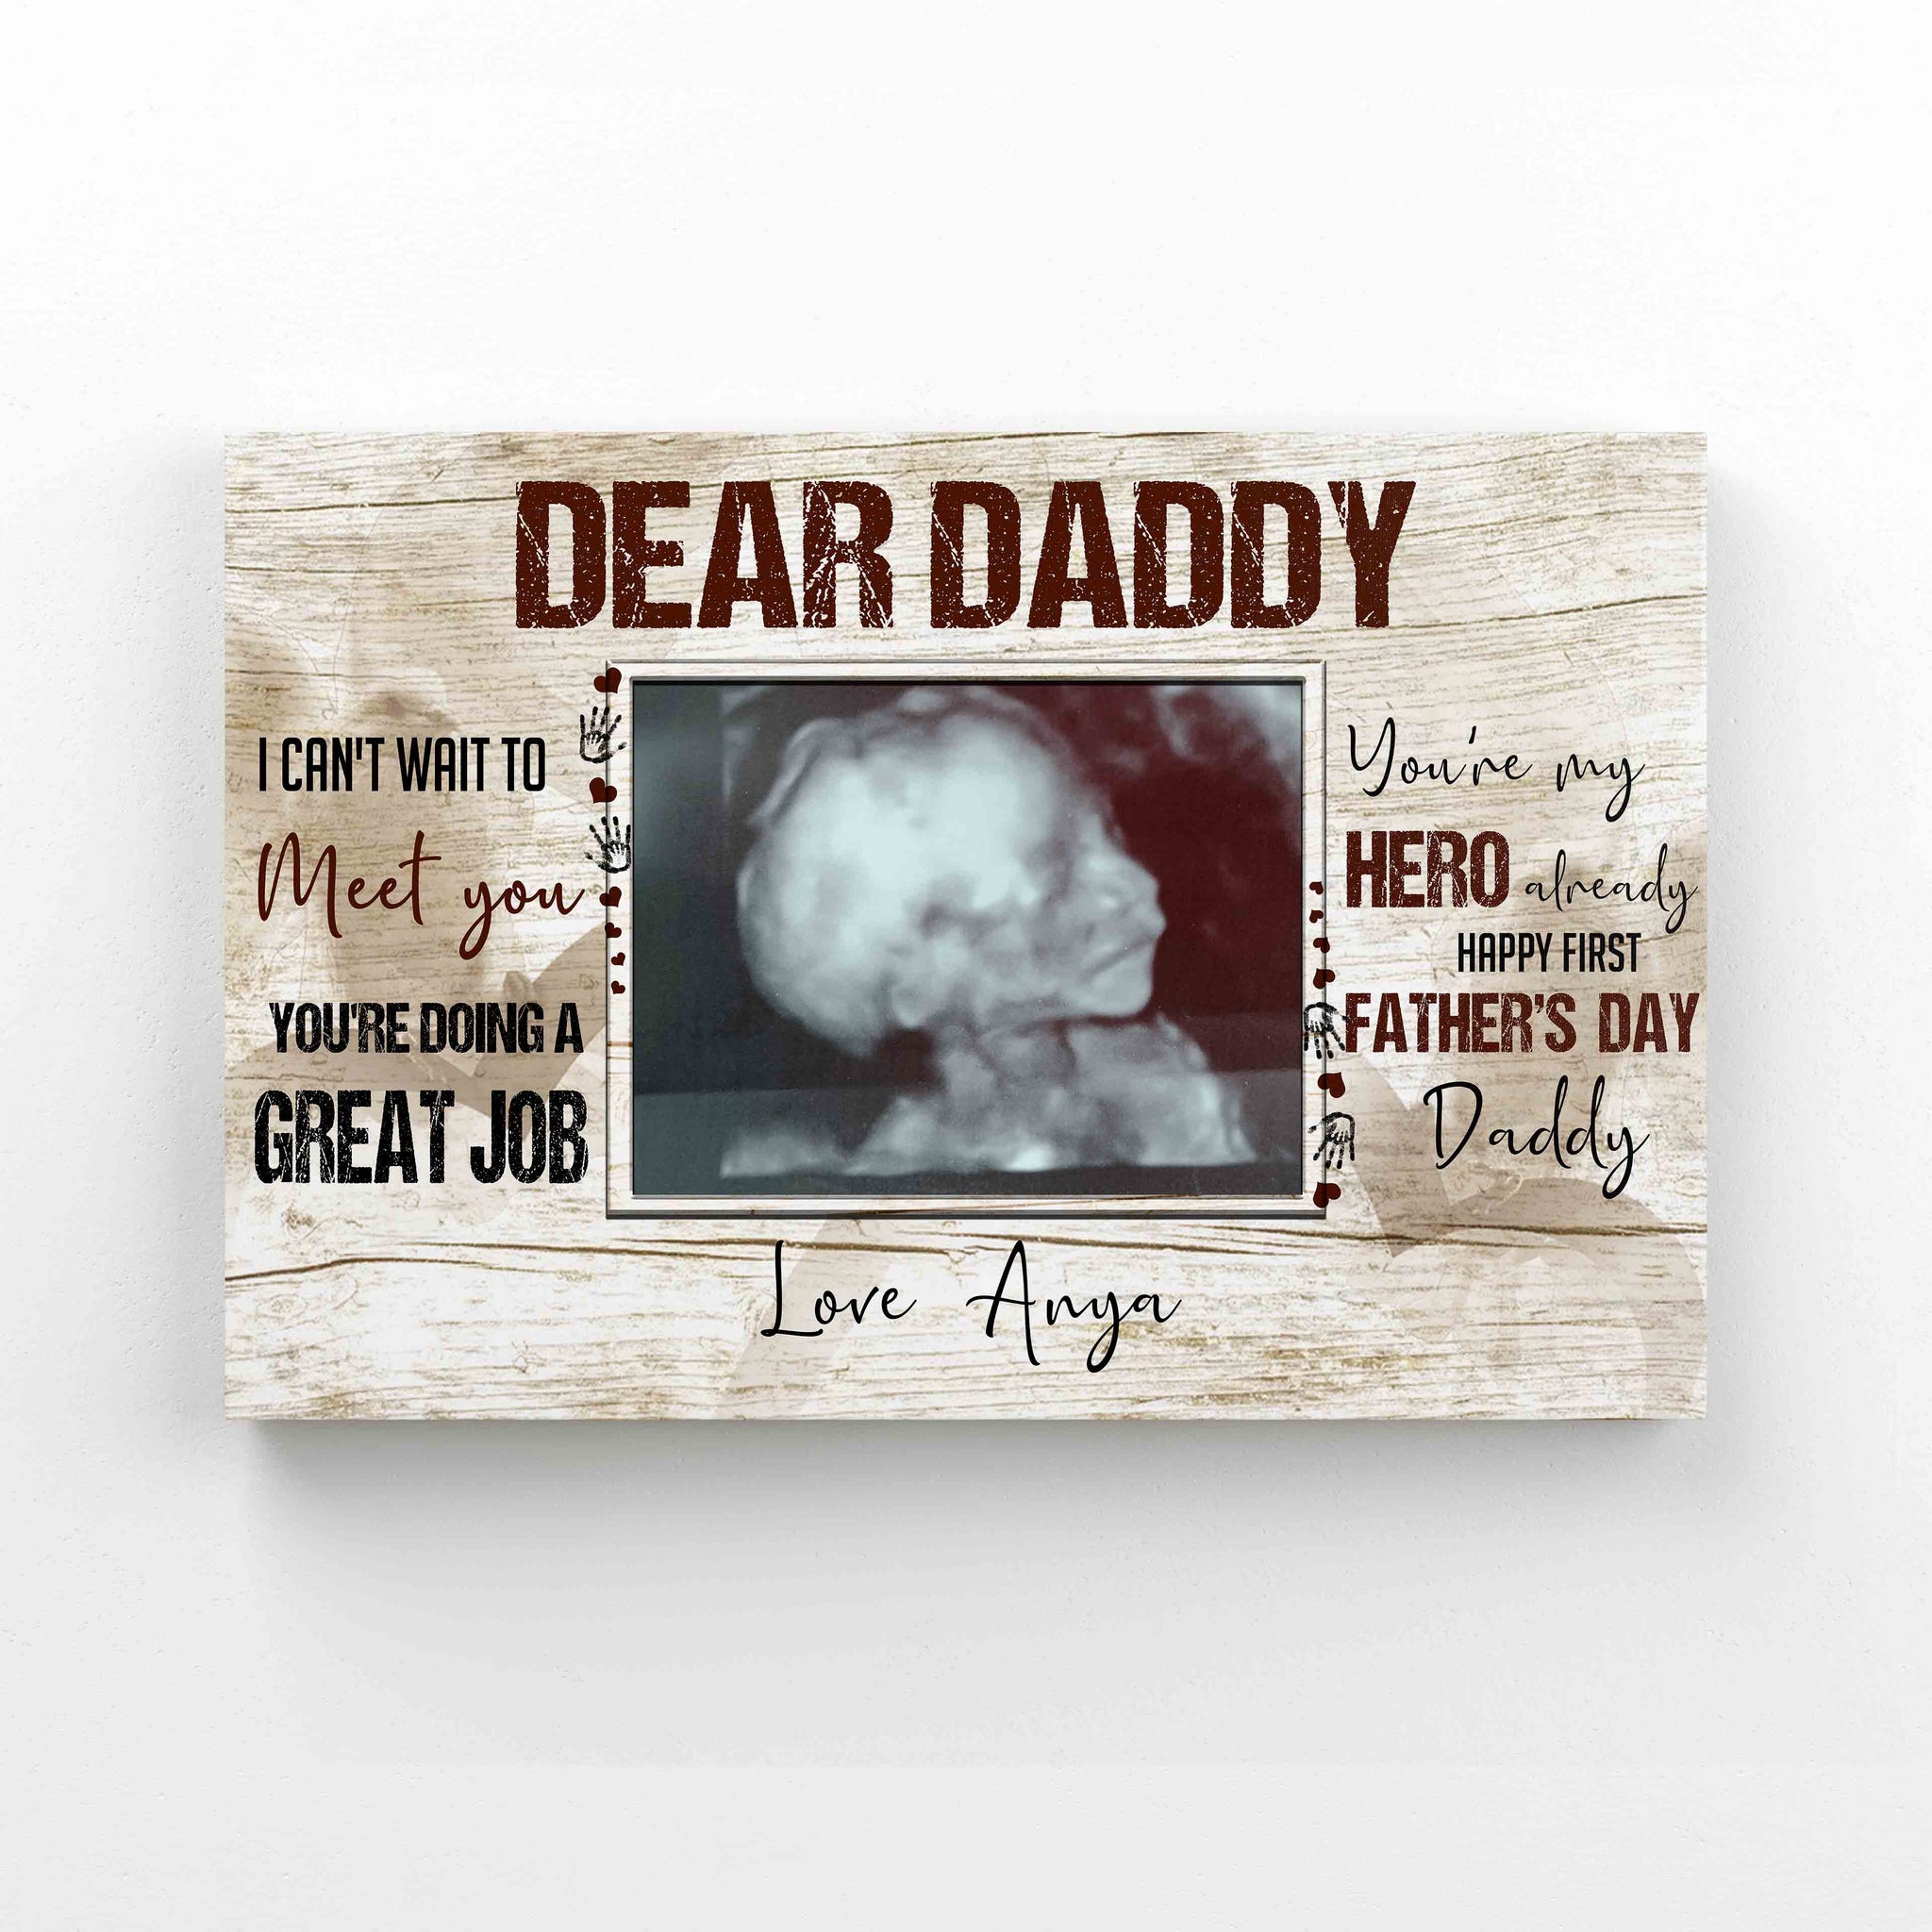 Personalized Image Canvas, Dear Daddy Canvas, Ultrasound Canvas, Custom Name Canvas, Canvas Wall Art